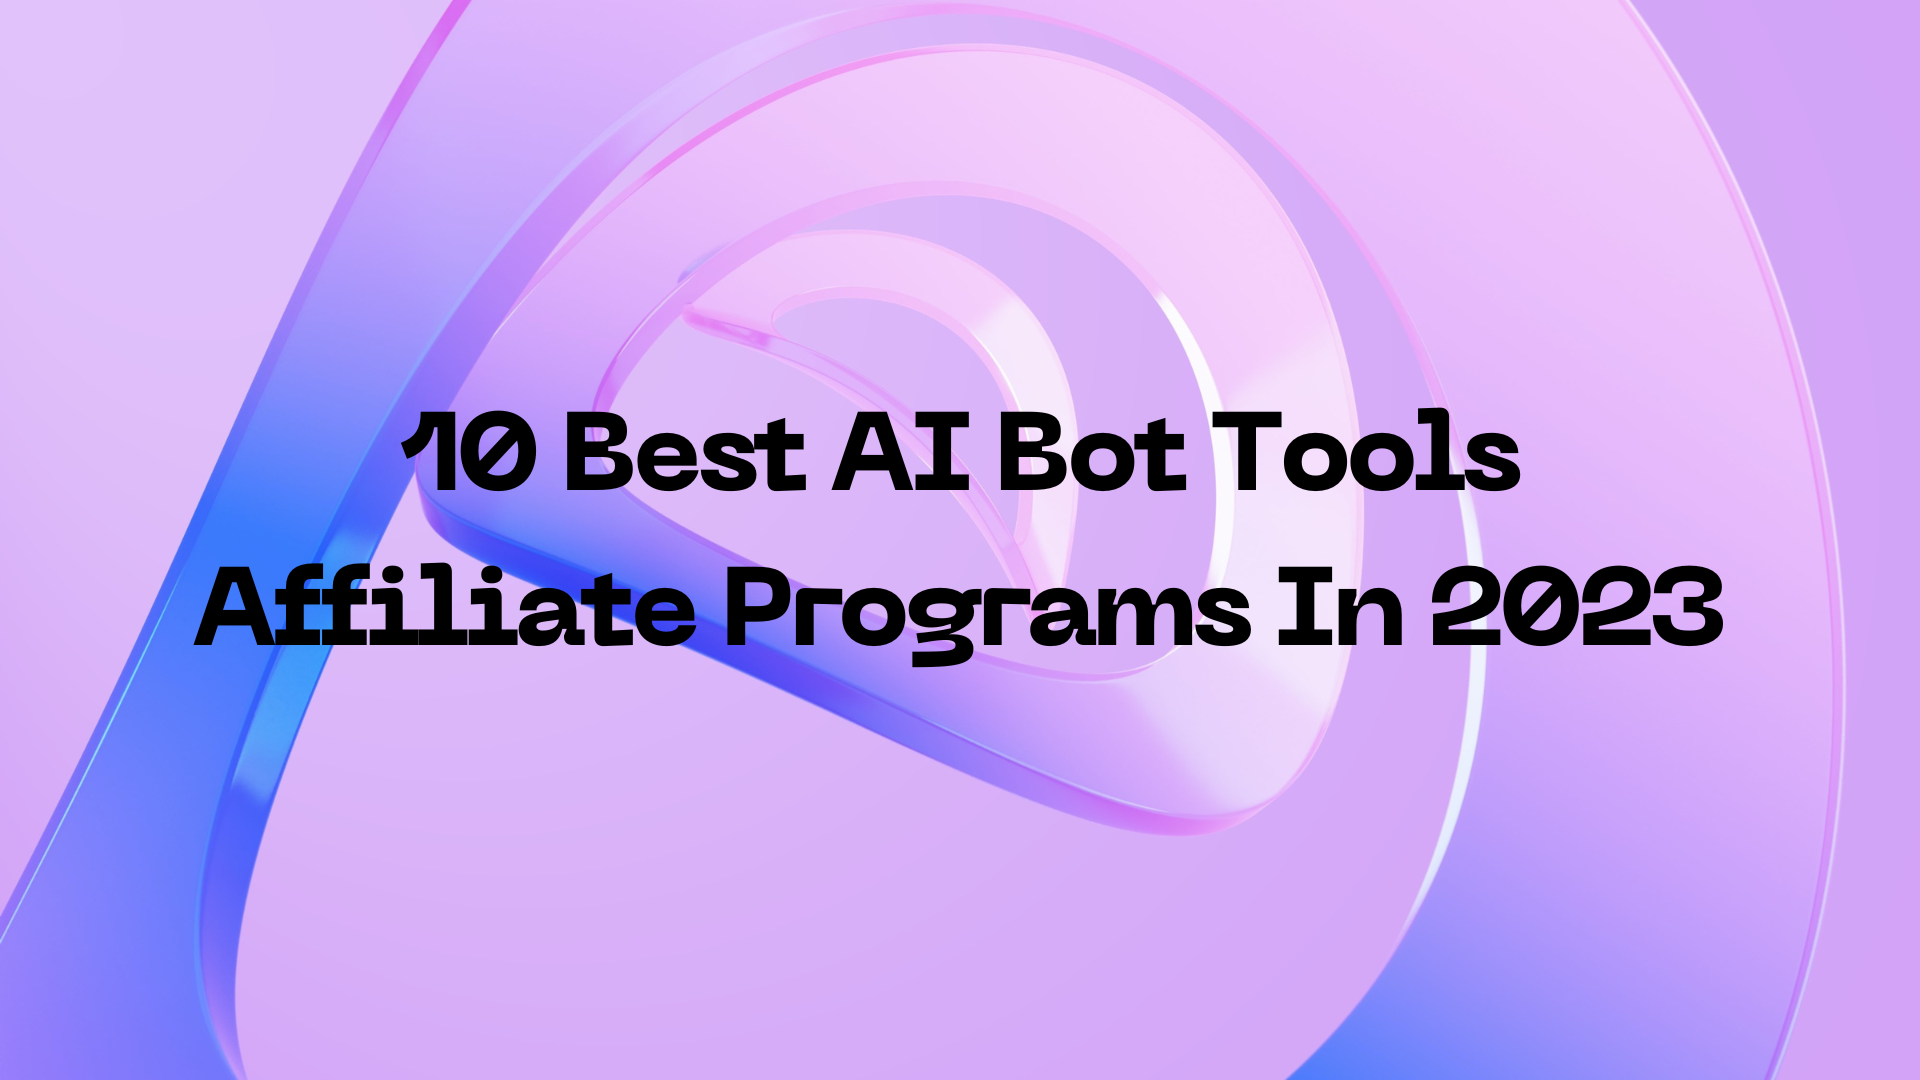 10 Best AI Bot Tools Affiliate Programs In 2023